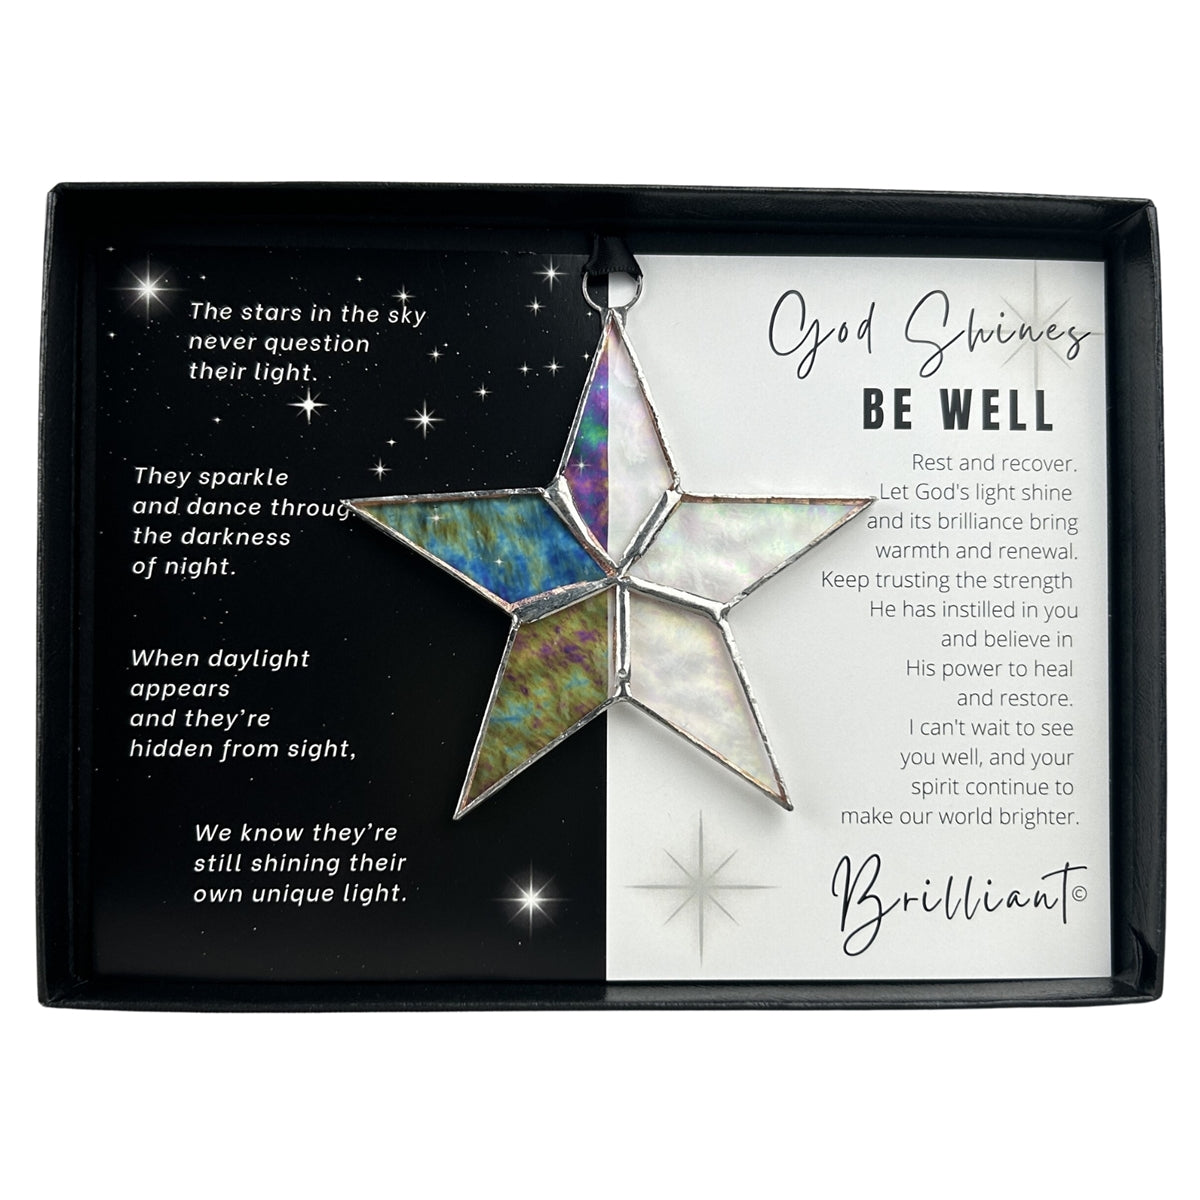 Handmade 4&quot; clear iridescent stained glass star with silver edging, packaged with &quot;God Shines Be Well&quot; sentiment in black gift box with clear lid.